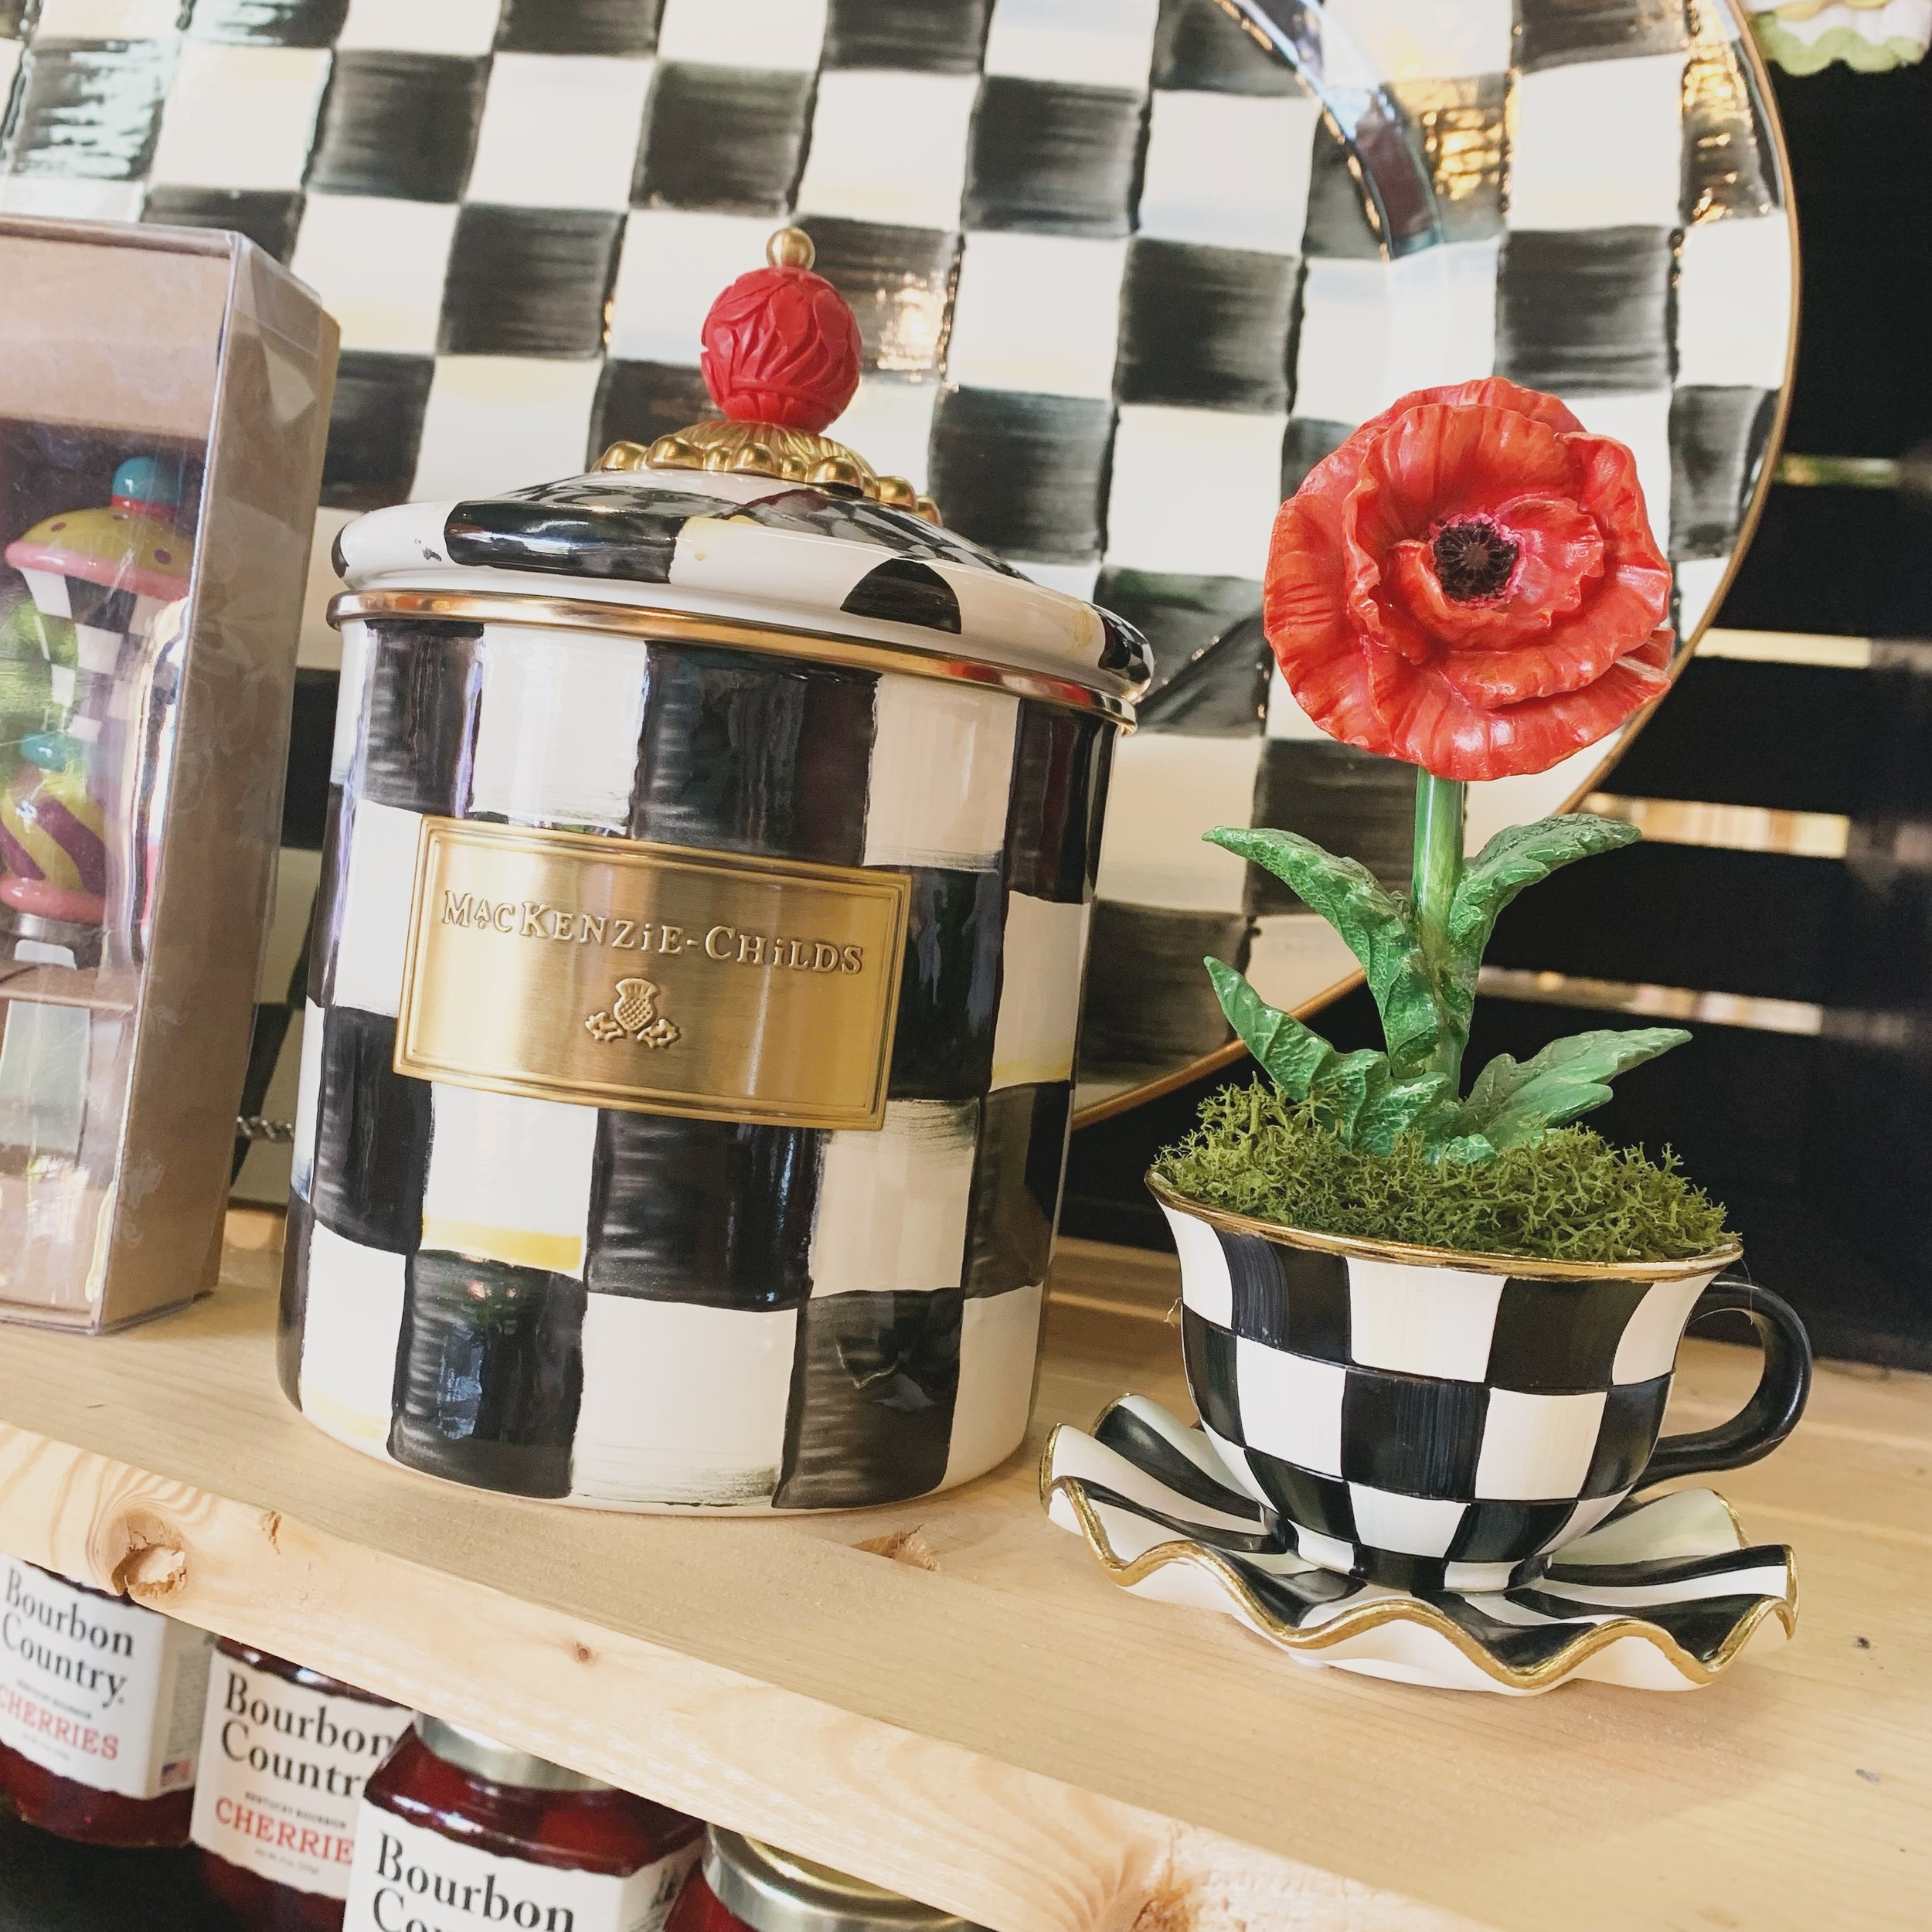 Mother&rsquo;s Day is easy with BAM! Mackenzie-Childs pieces are timeless, chic, and elegant. Give Mom a classic gift that she&rsquo;ll cherish for years. 

Give the best gift, host the best gathering, have the most fun.
🏬Shop in Store: 321 Broadway